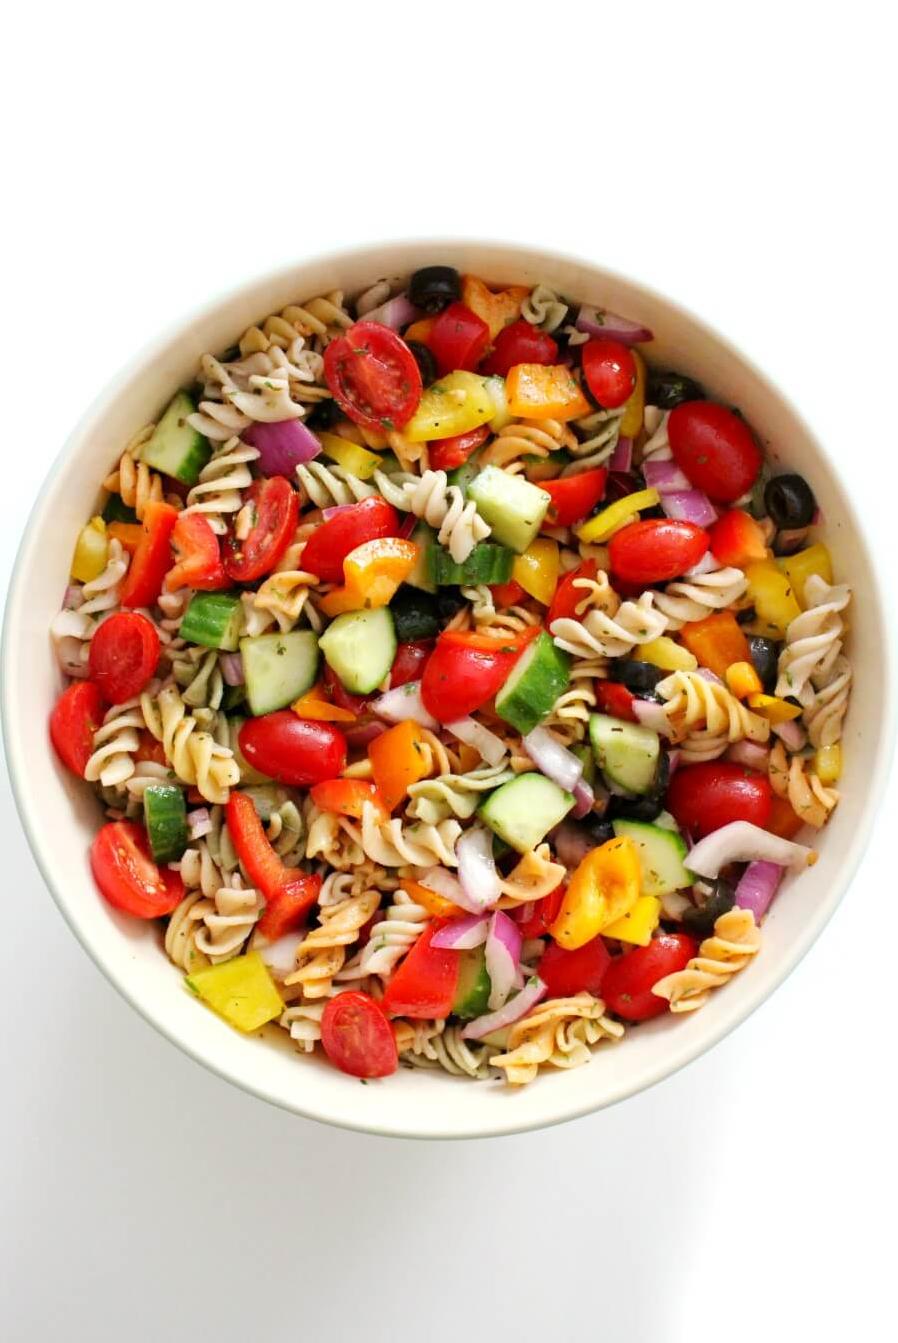  A gluten-free pasta salad that's easy to make, and a great option for a refreshing summer meal